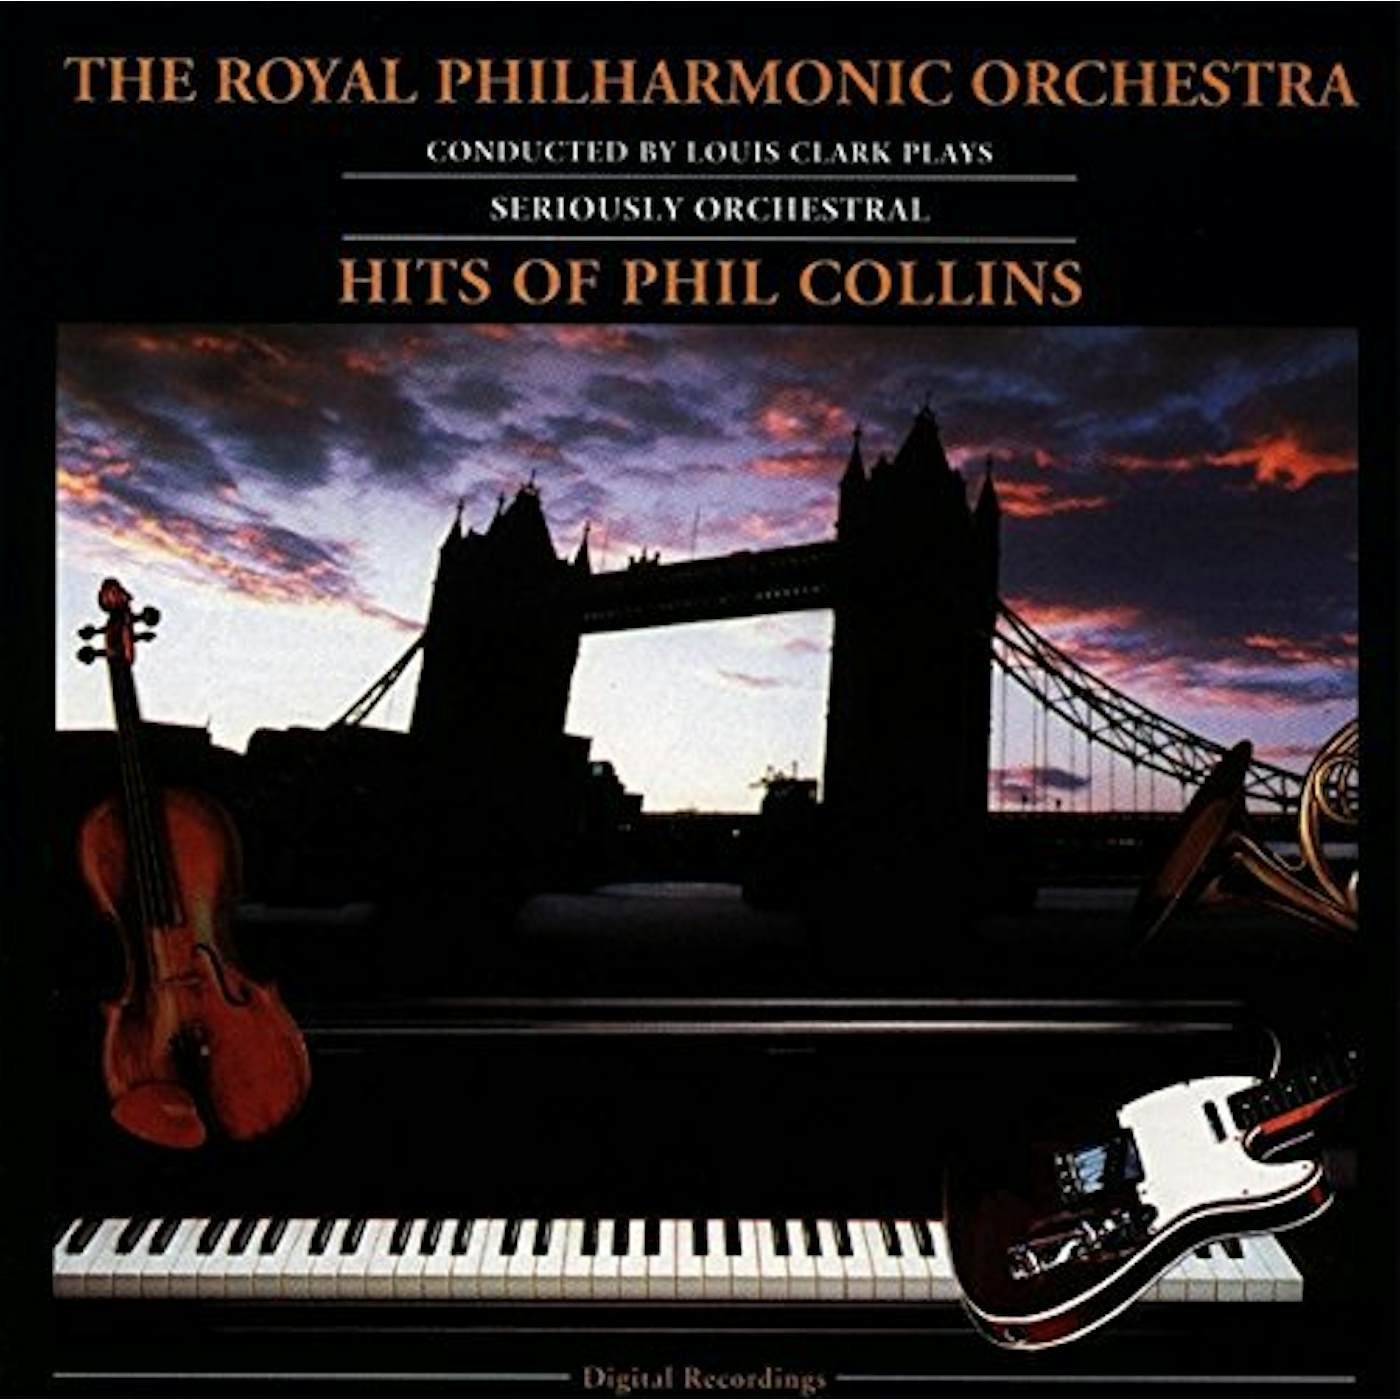 Royal Philharmonic Orchestra PLAYS PHIL COLLINS Vinyl Record